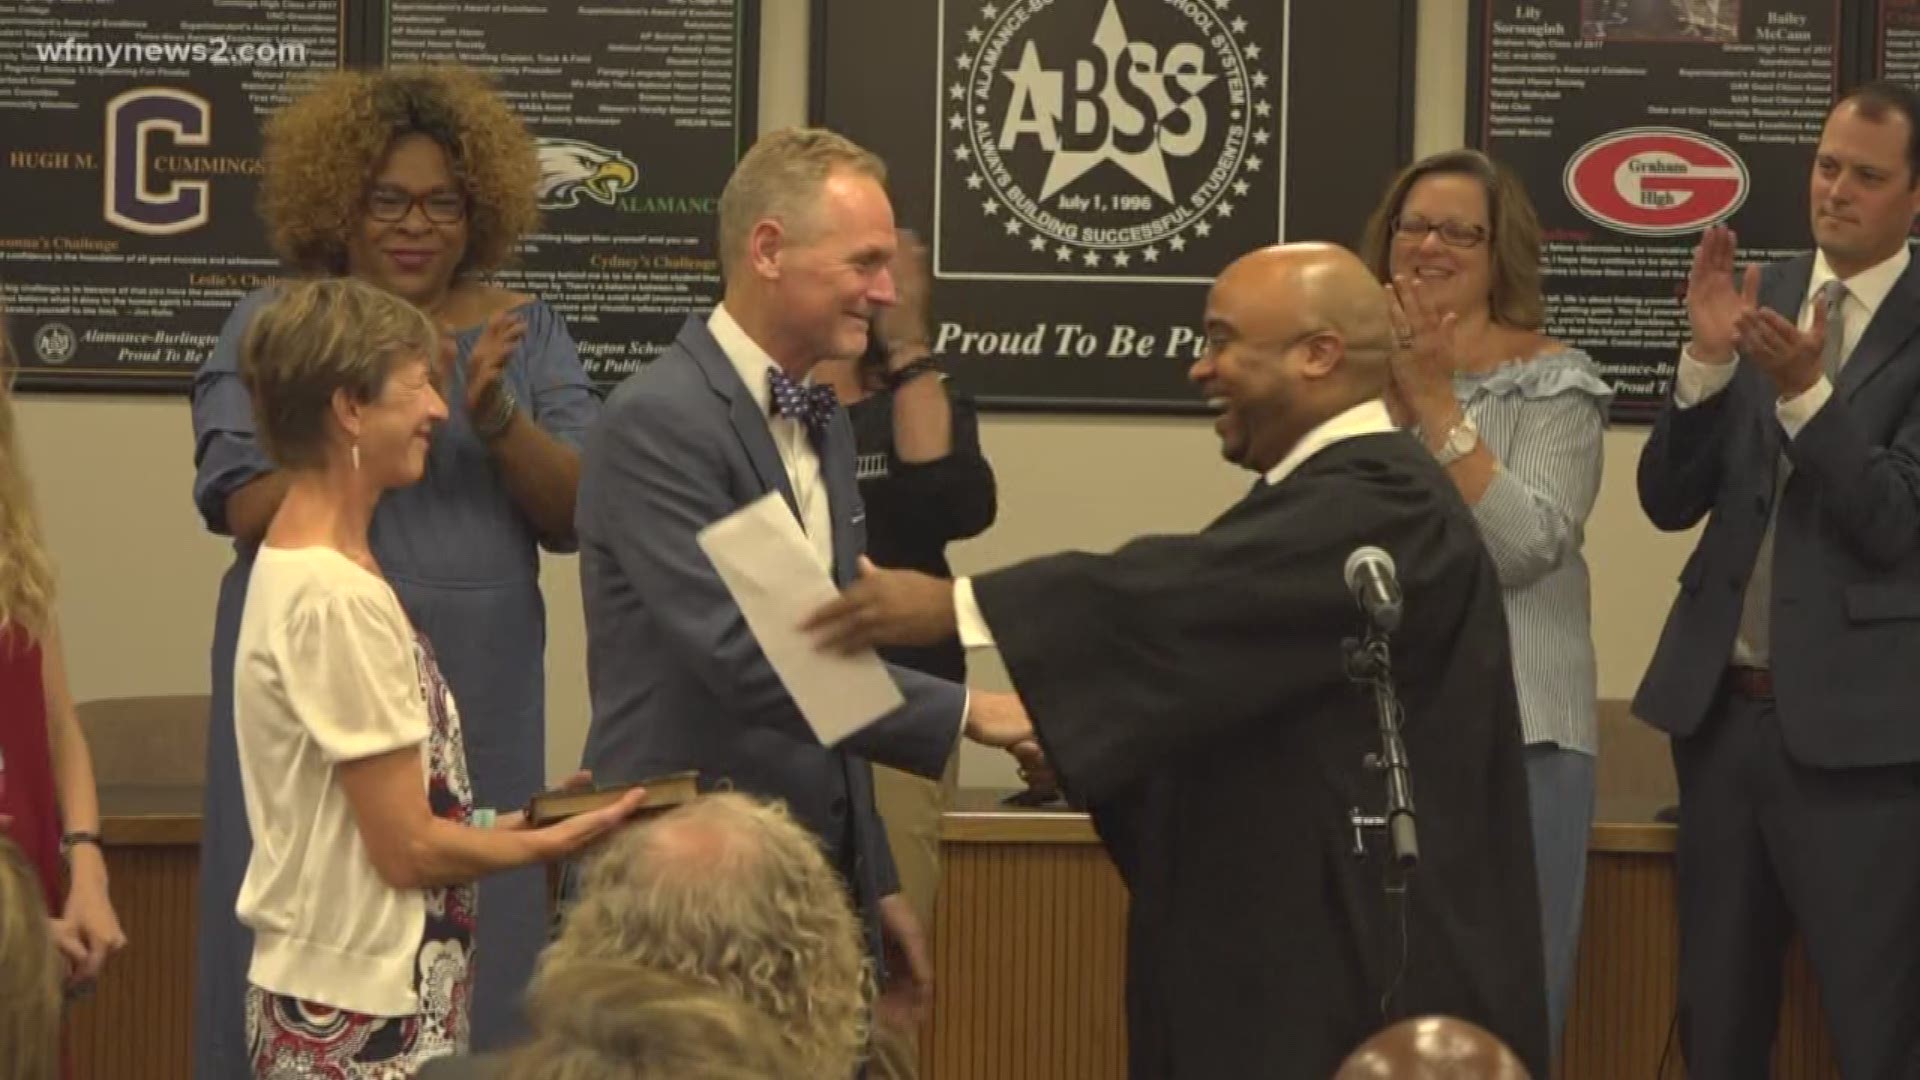 ABSS Introduces New Superintendent